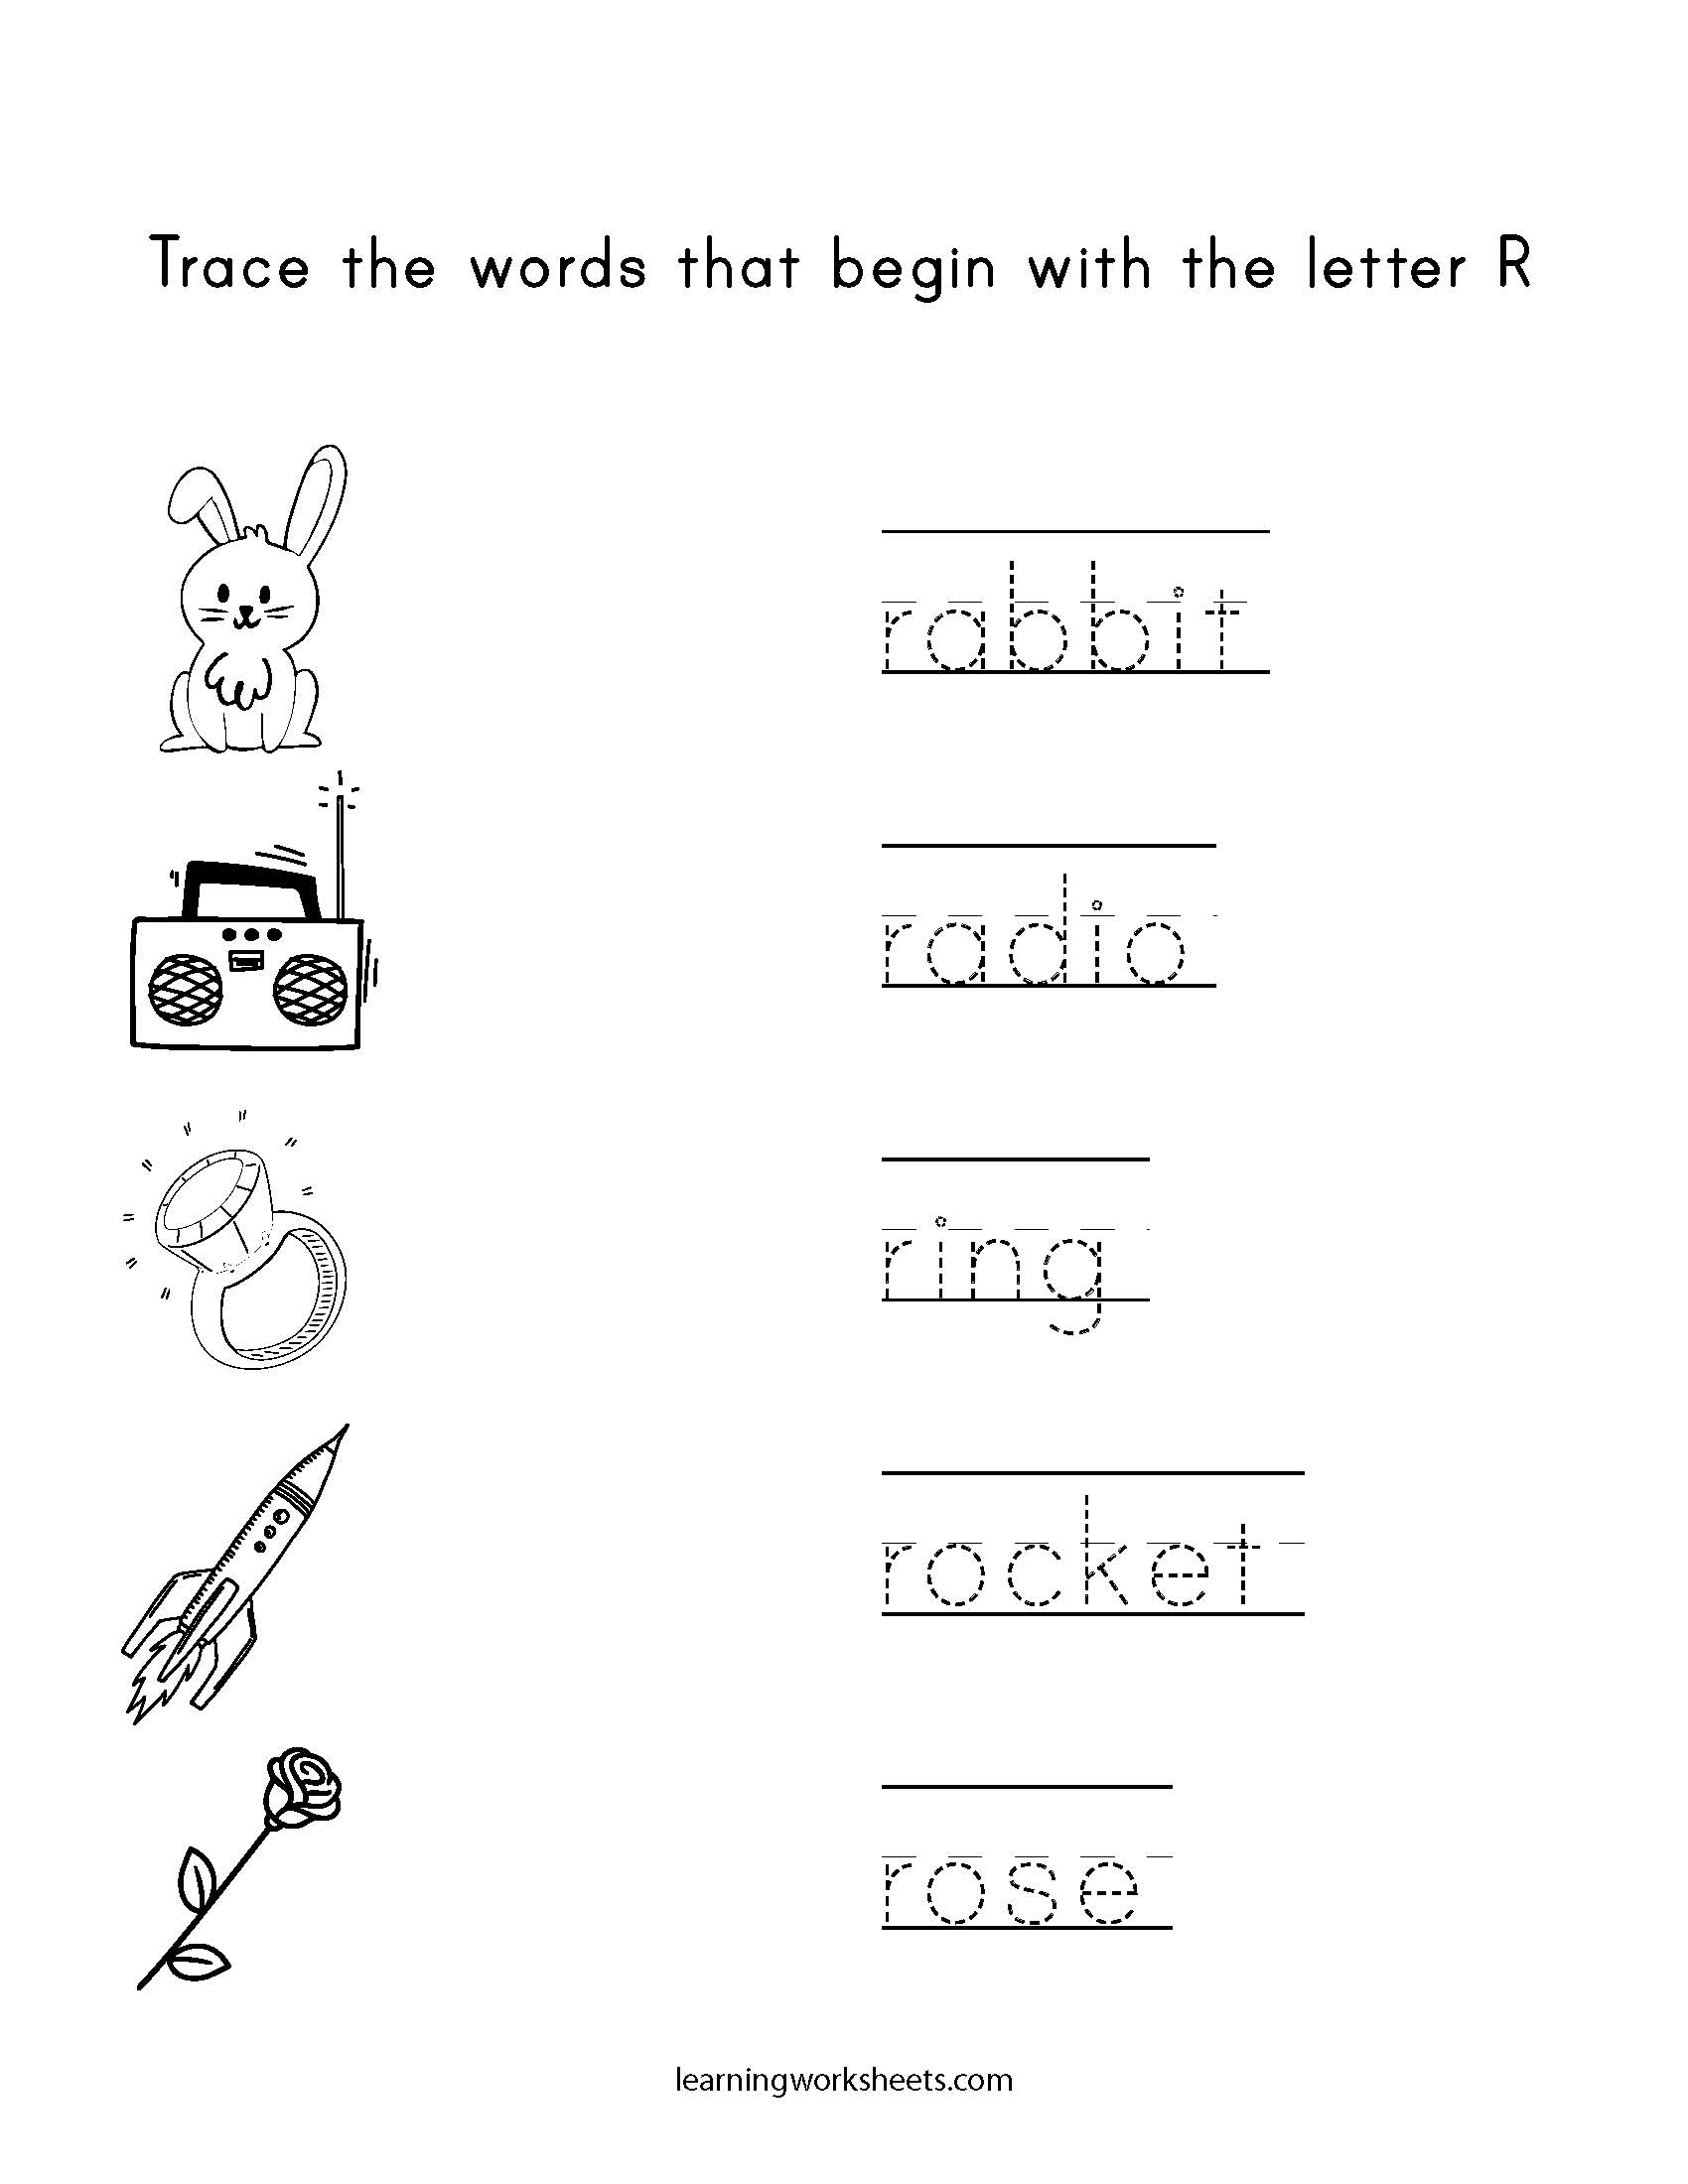 Trace Words That Begin With The Letter R - learning worksheets